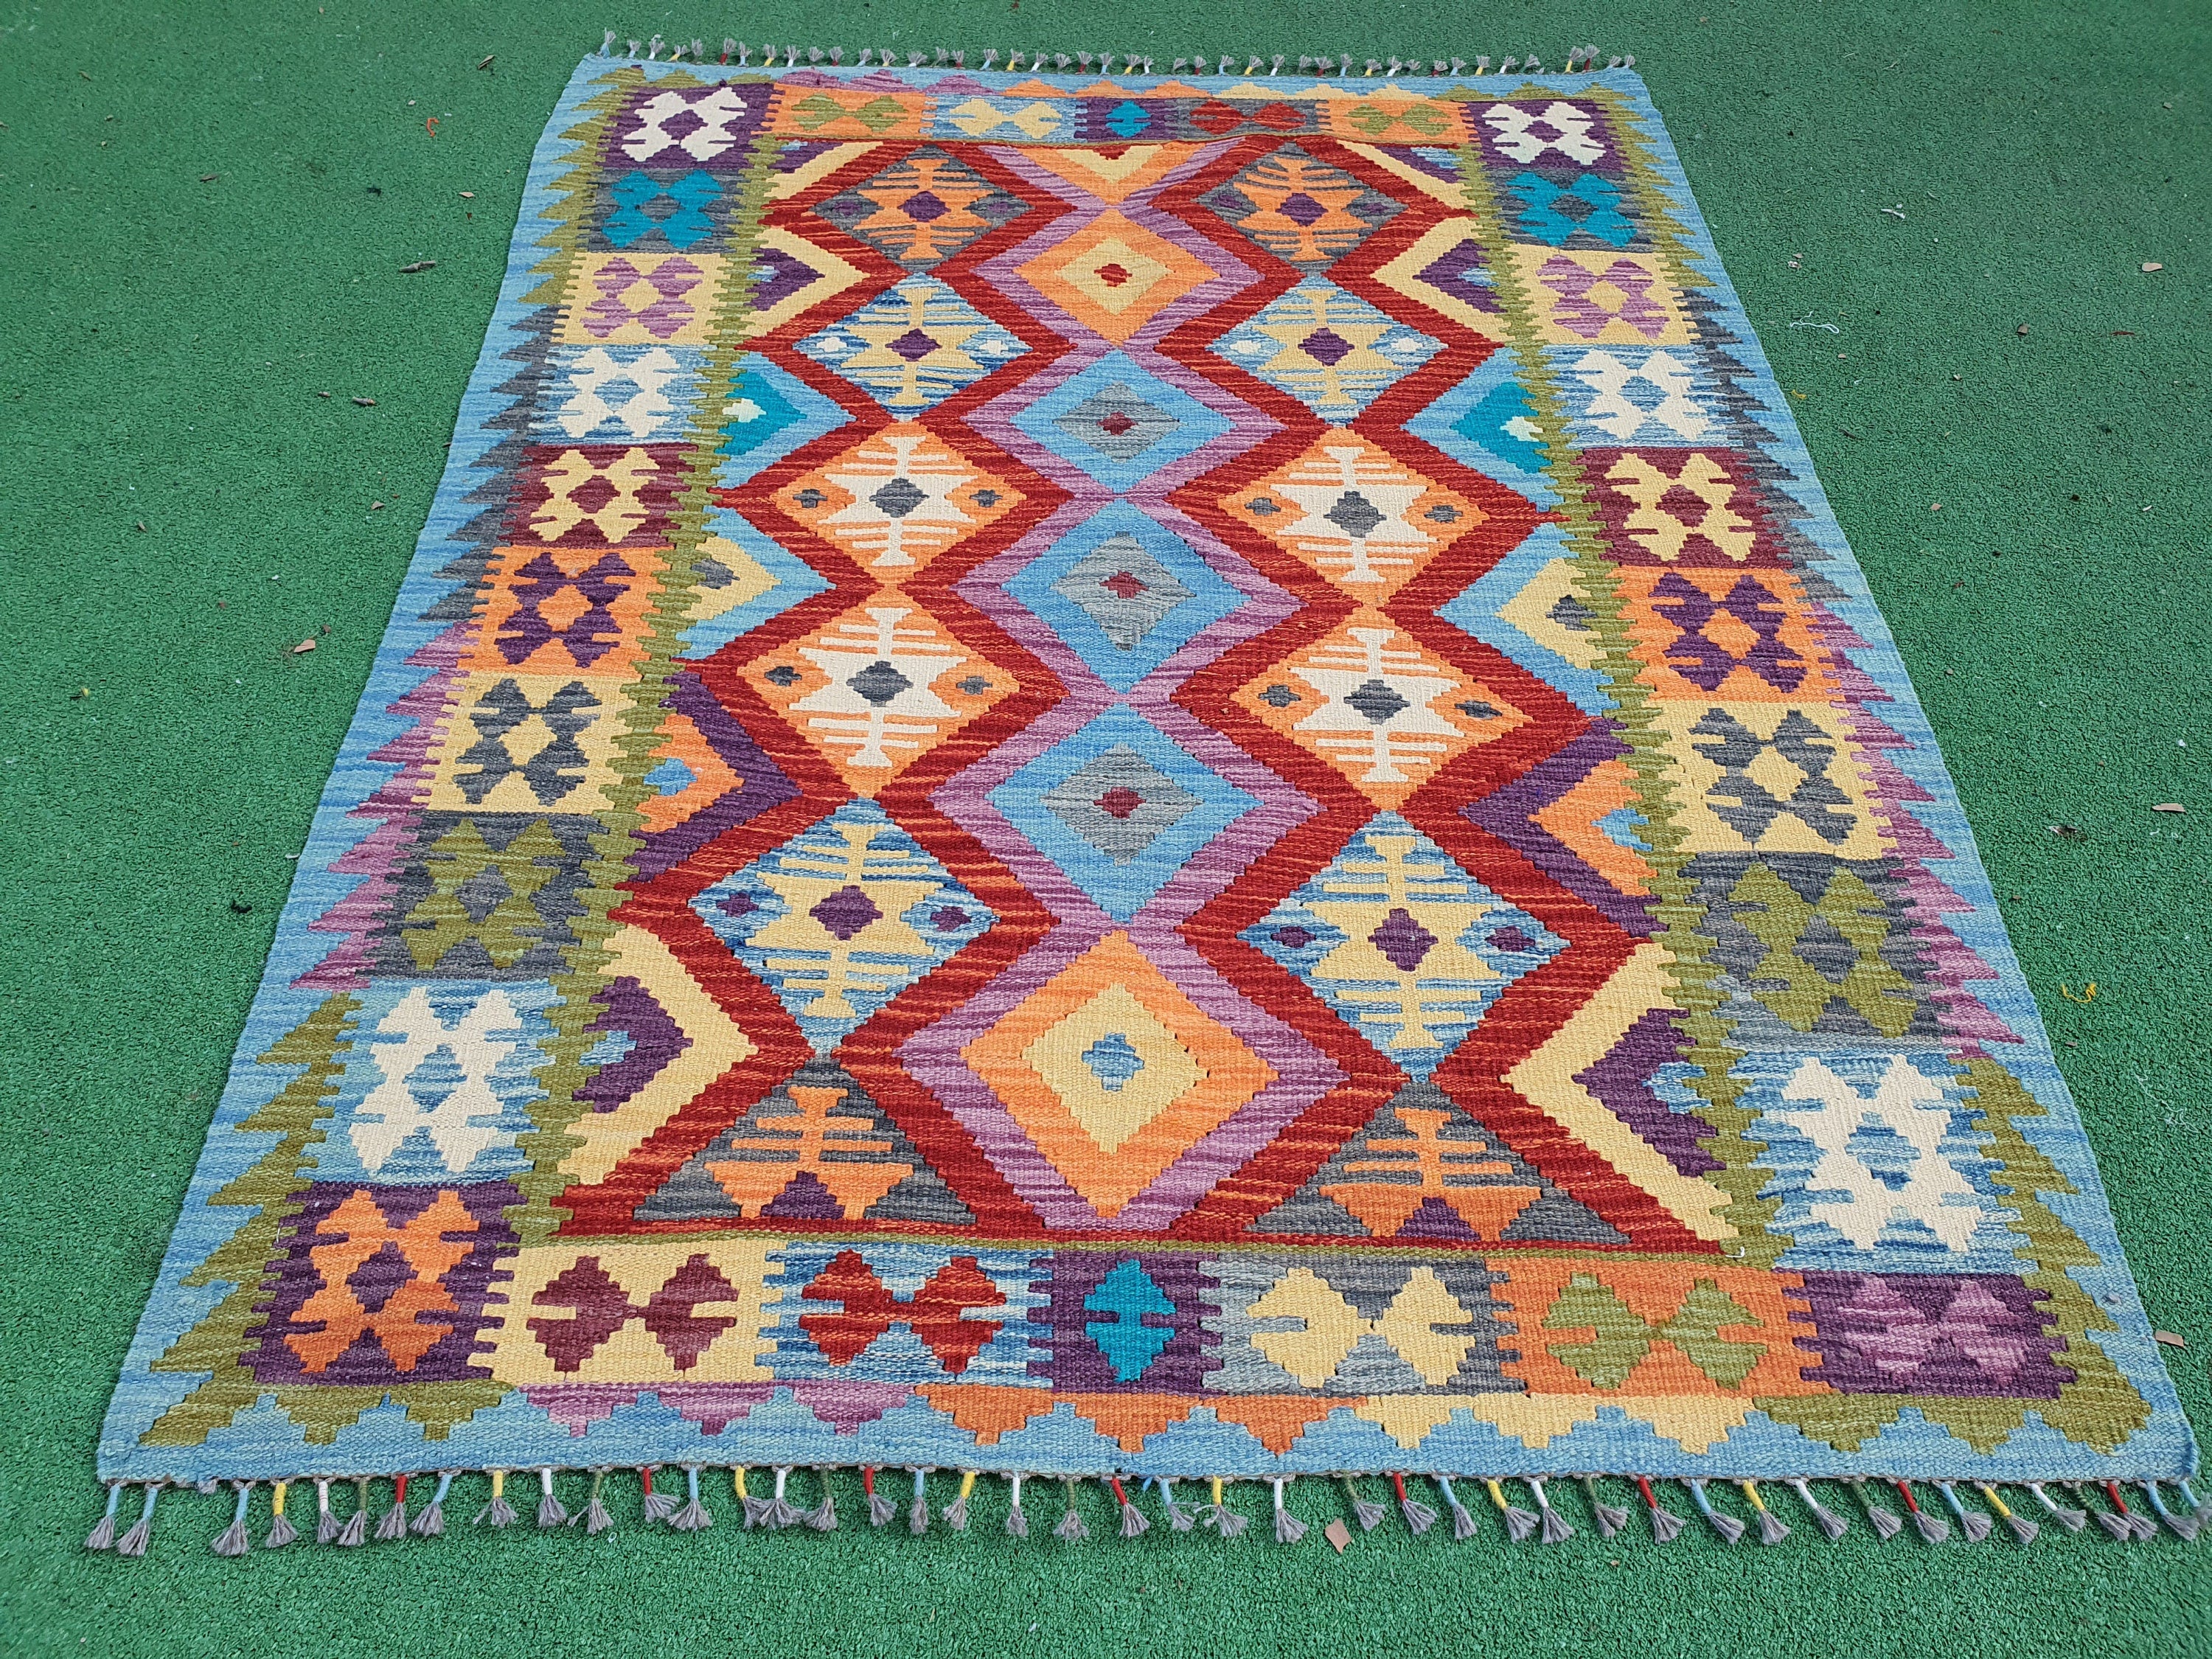 Afghan Kilim Rug, 6 x 4 ft Red Blue and Rust Red Contemporary Turkish Kilim Rug